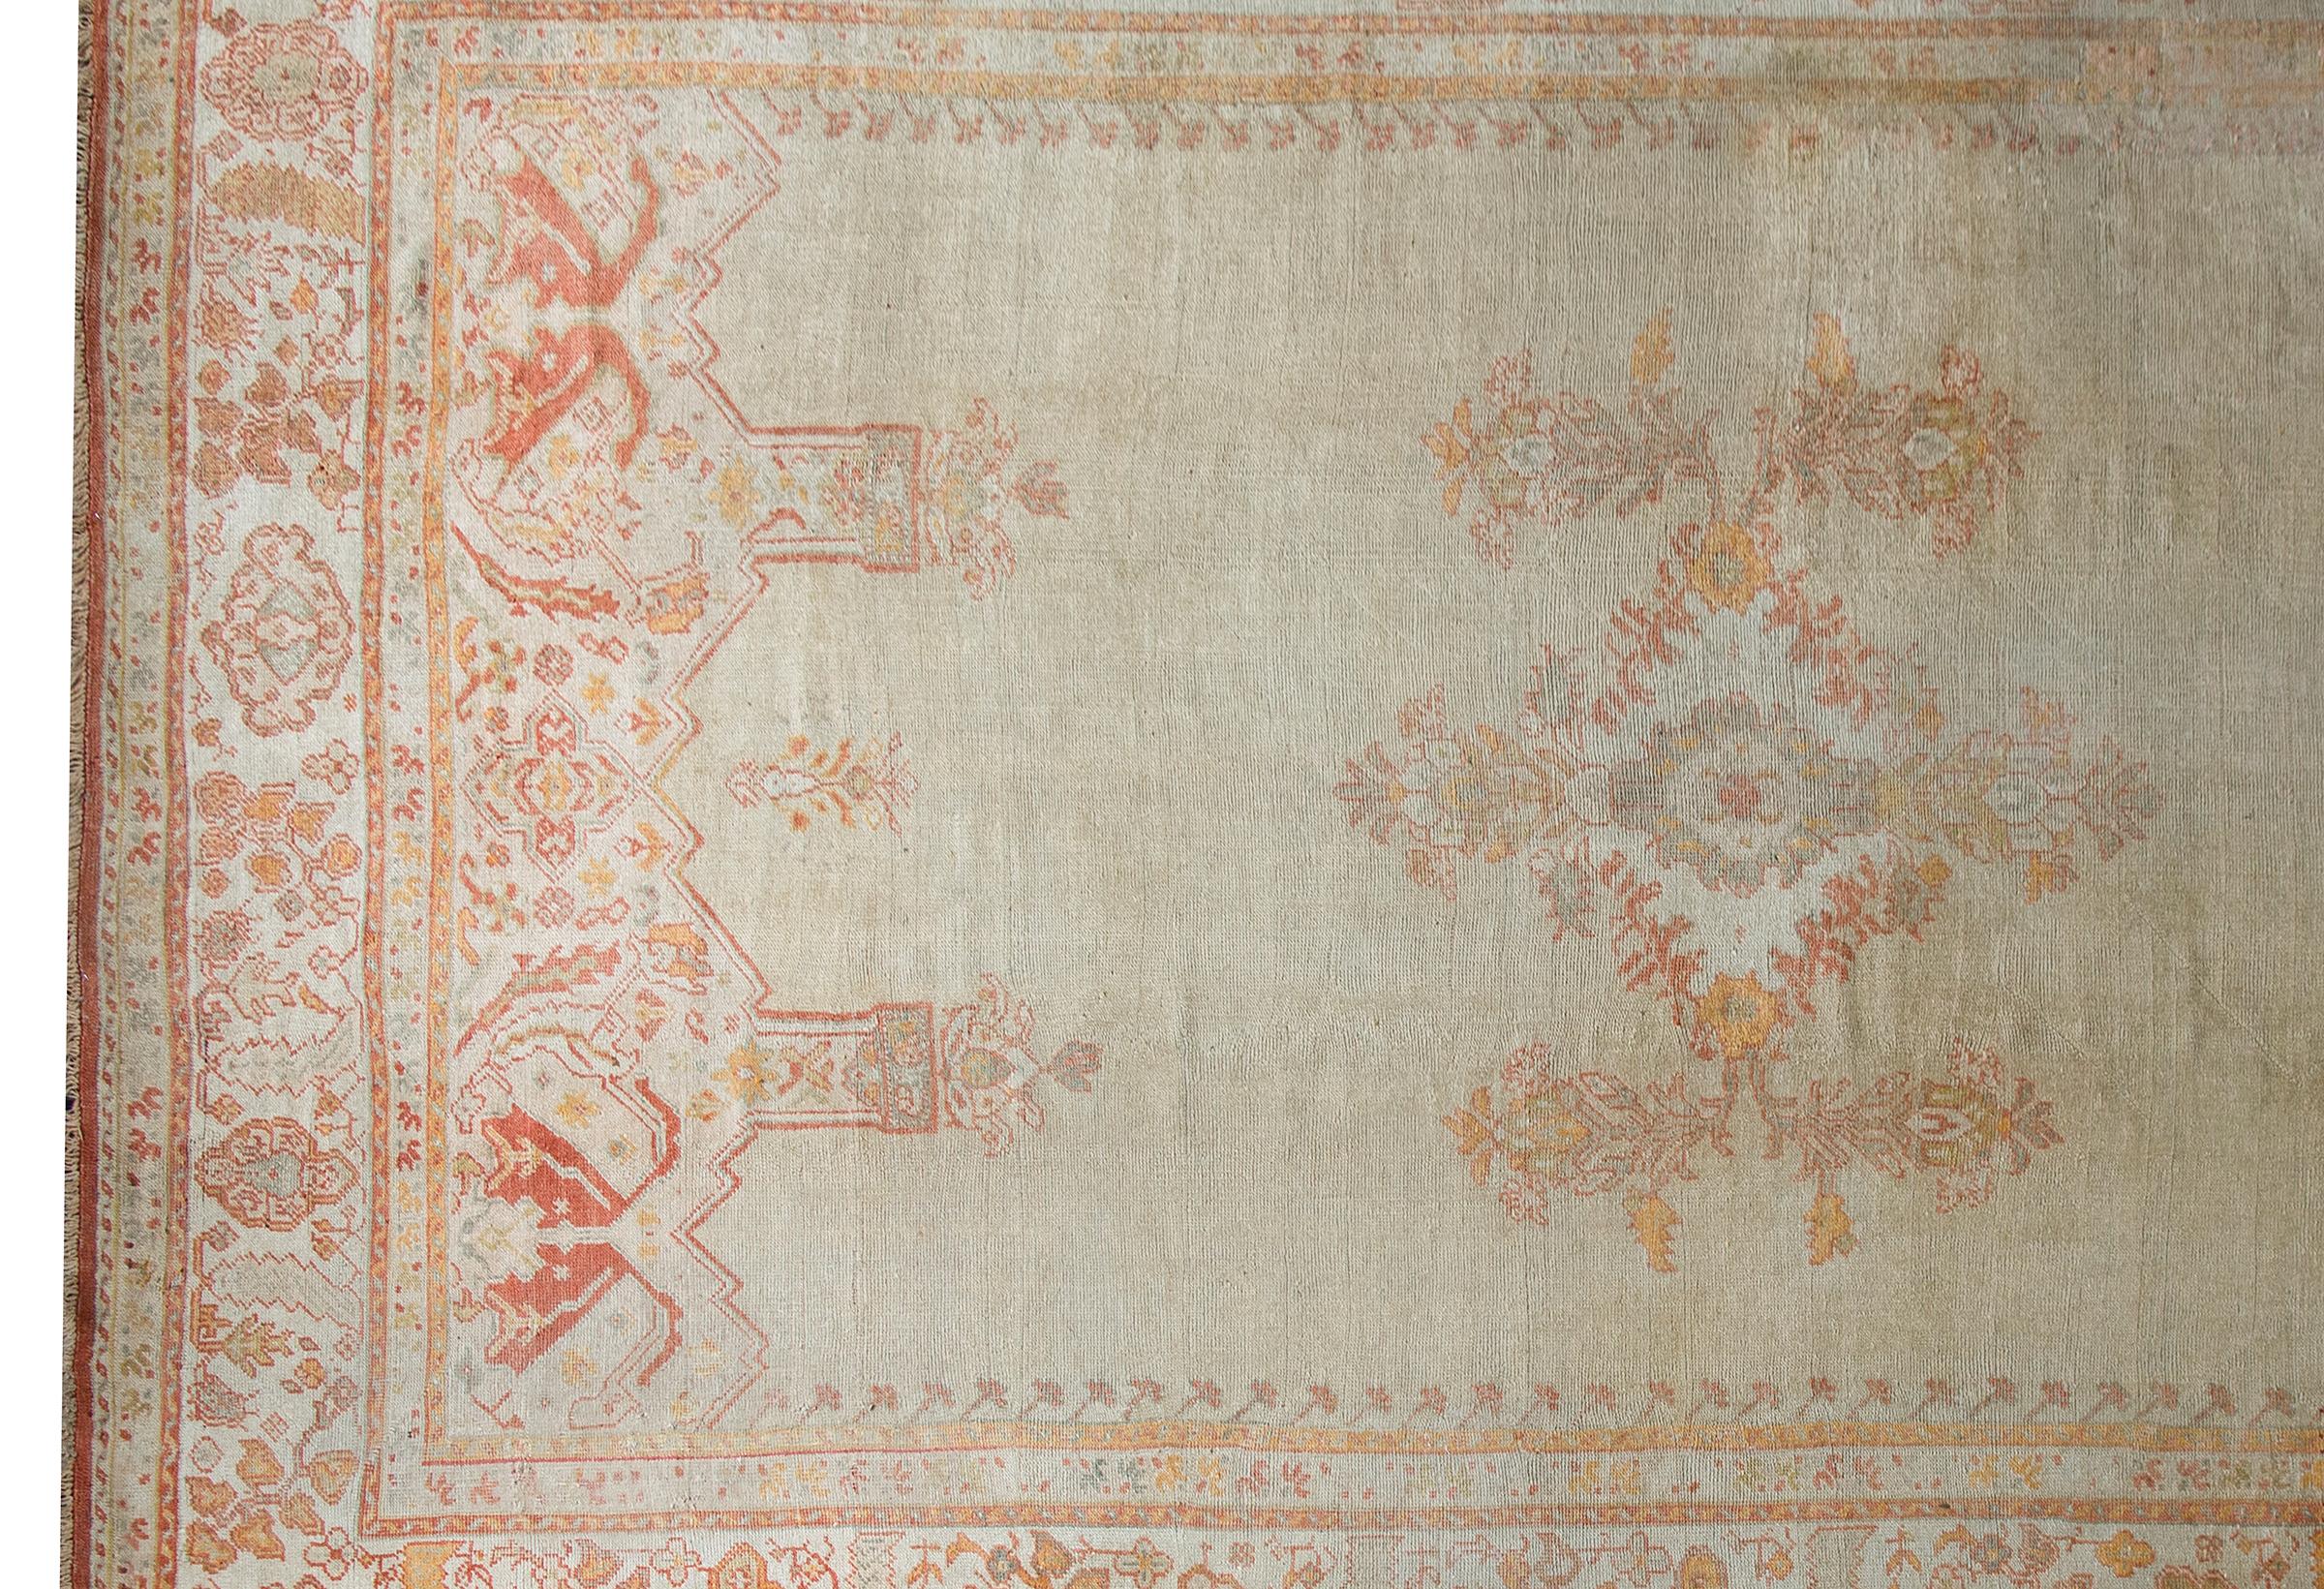 Late 19th Century Turkish Oushak Rug In Good Condition For Sale In Chicago, IL